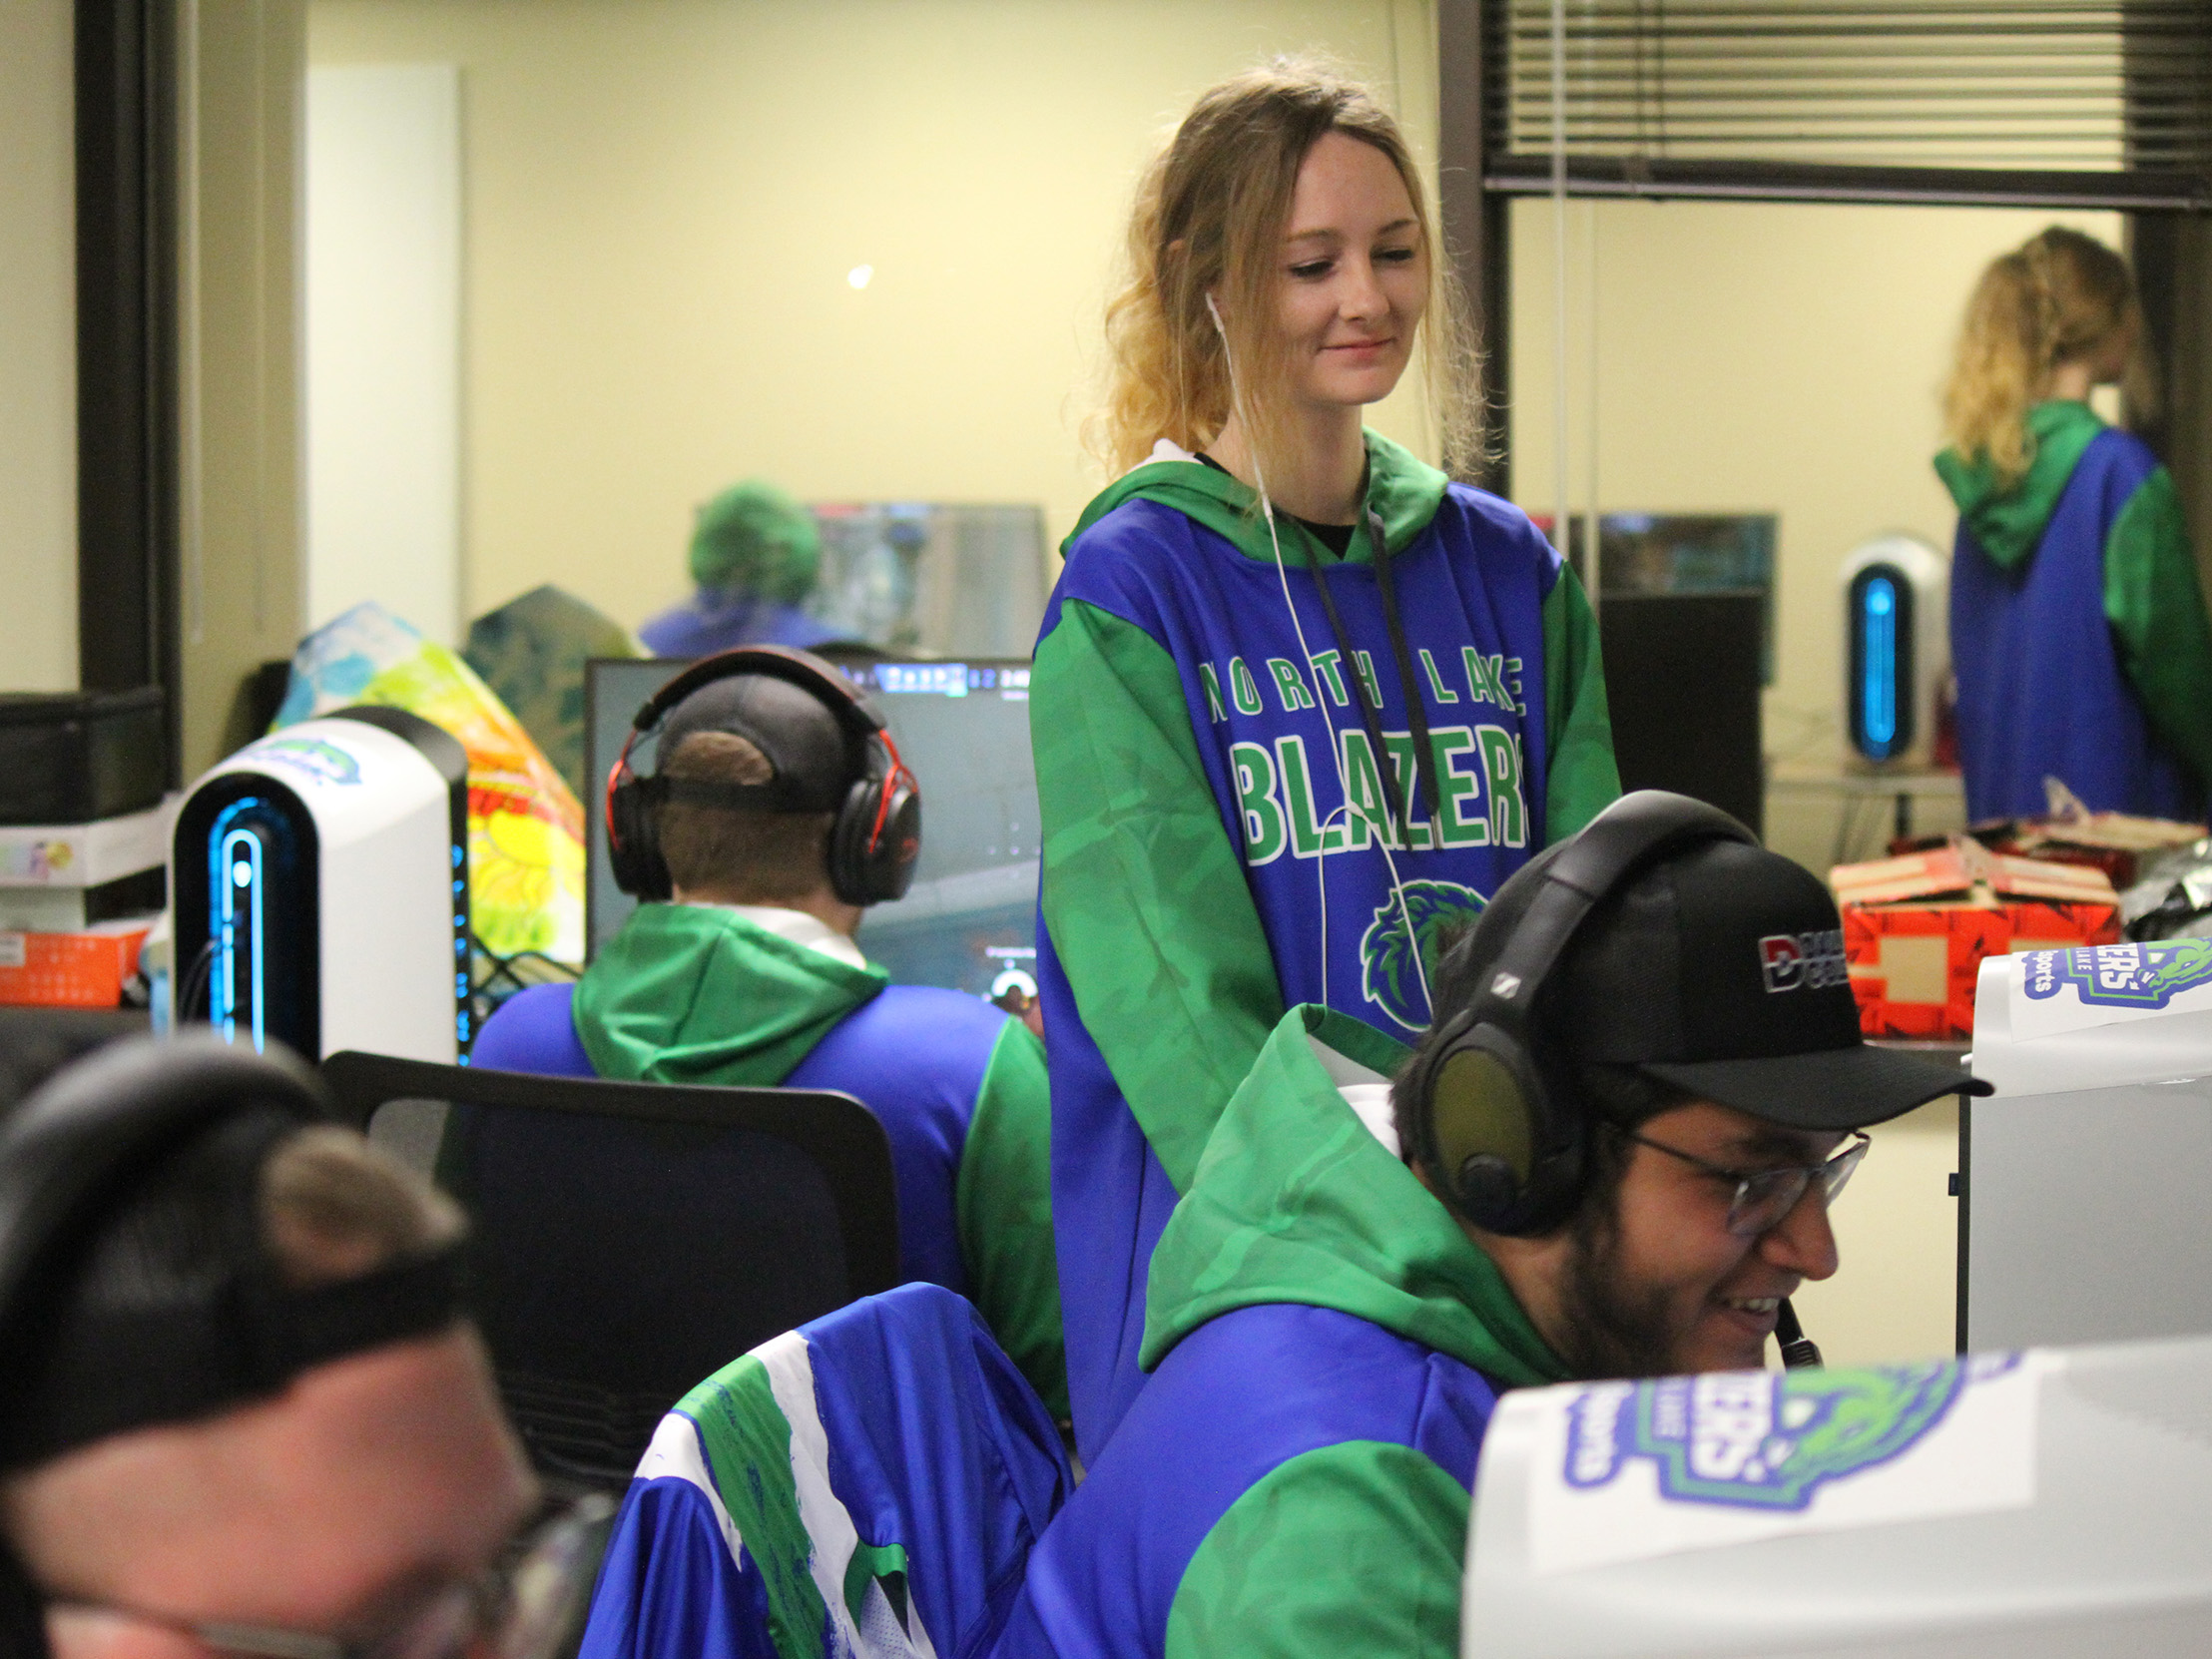 Sky McCort is Dallas College North Lake's esports coach. She also coaches at the Brookhaven and Richland campuses within Dallas College's system. 